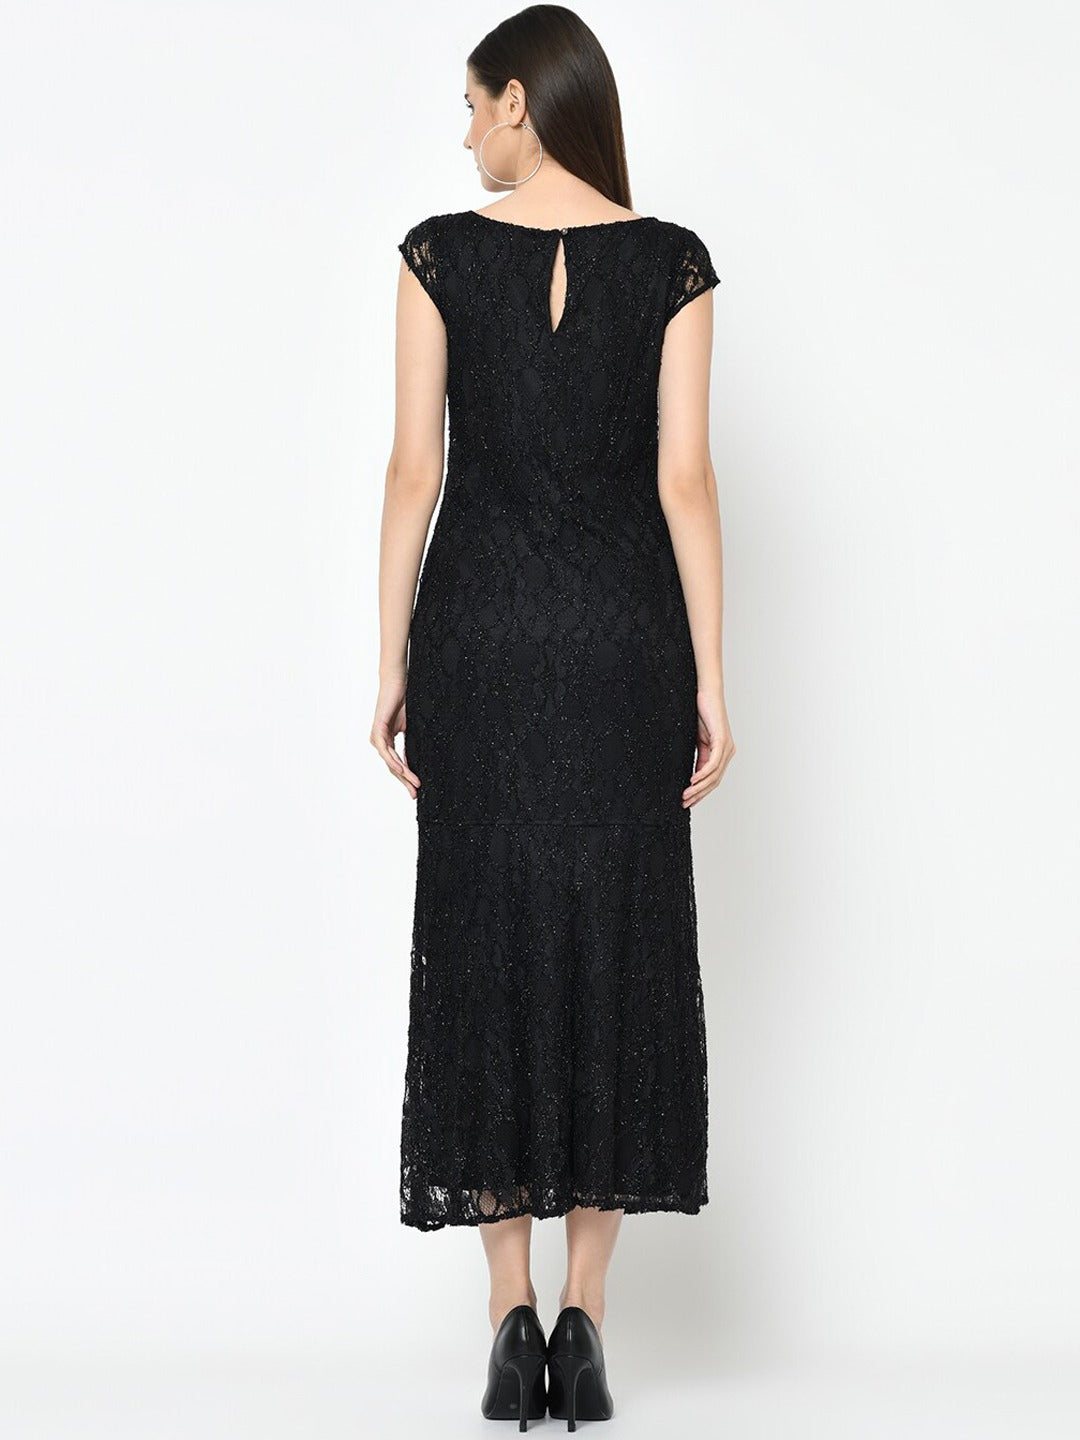 CapSleeve Solid Lace Dress